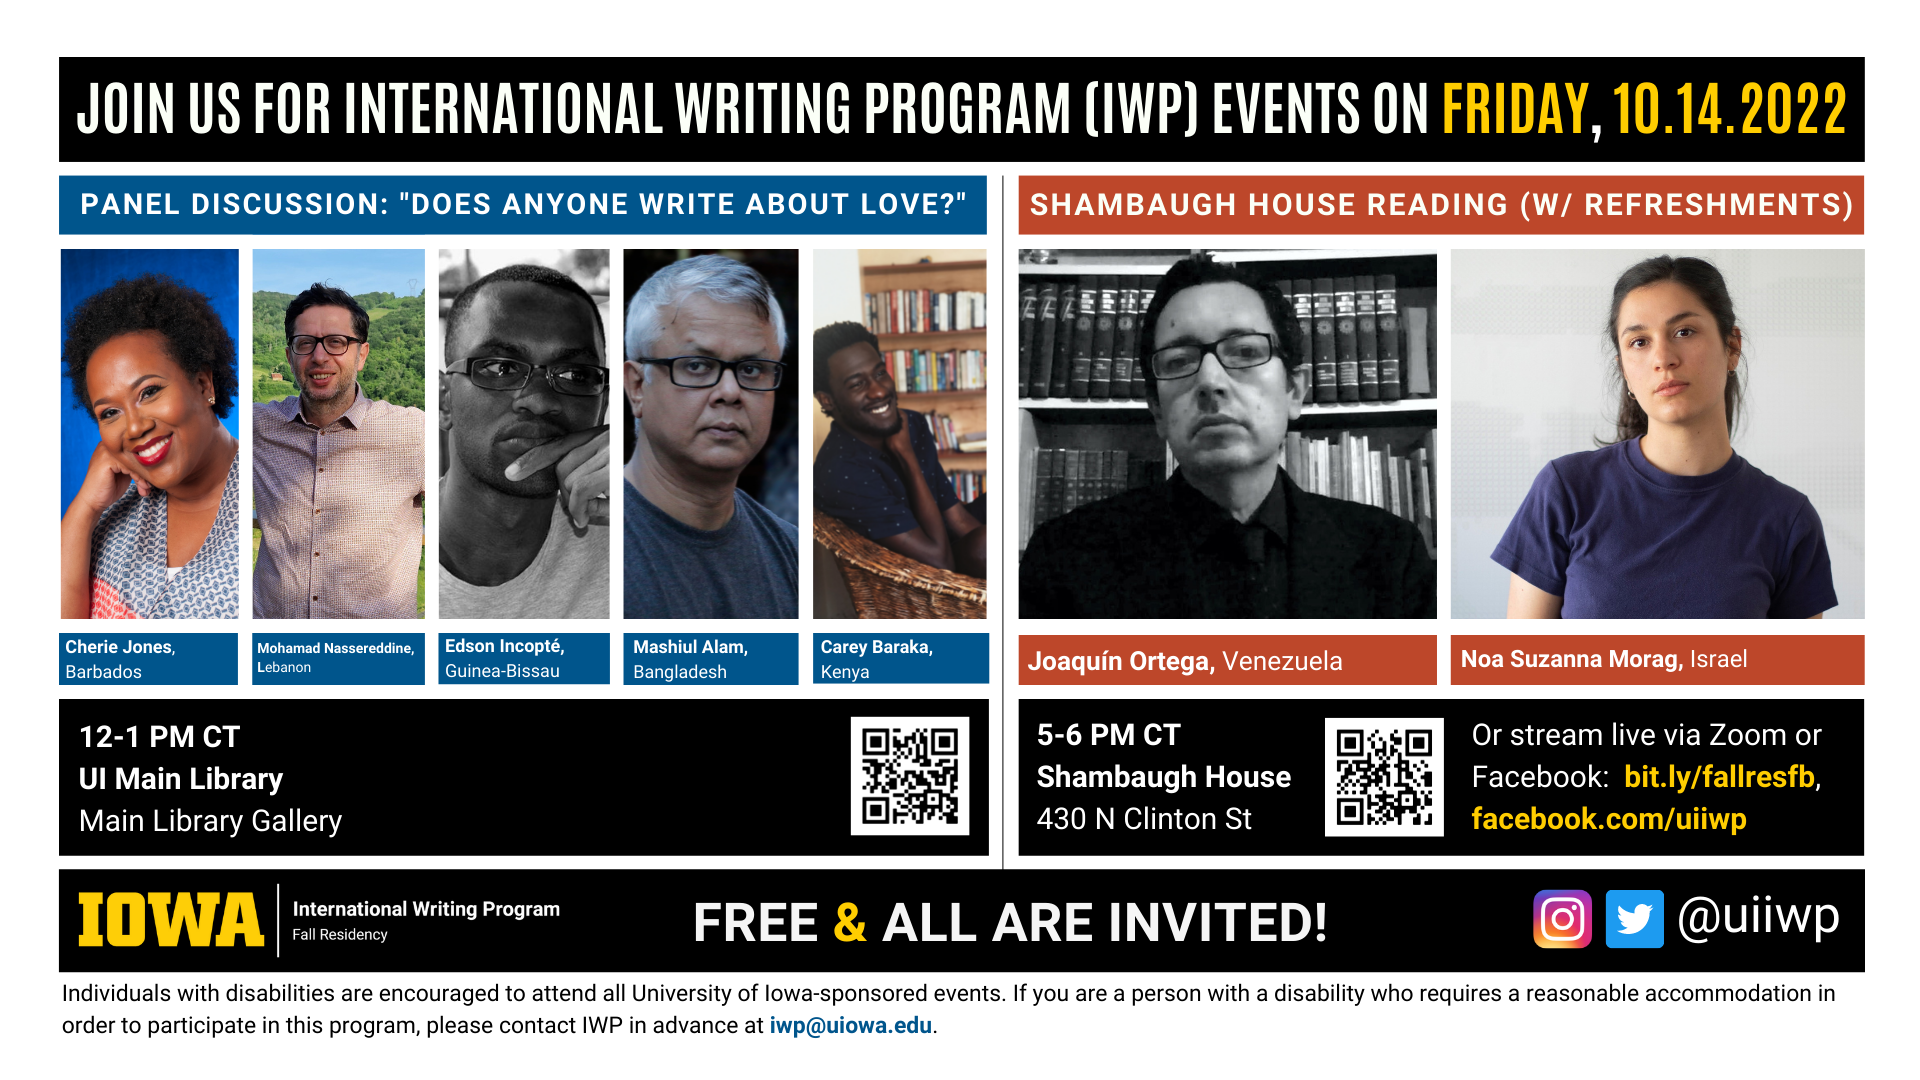 An image with two halves, each advertising one event. The image as a whole is labeled “Join us for International Writing Program (IWP) events on Friday, 10.14.2022.” The left half of the image is labeled, “'Writing the Not Self' Library Panel Discussion.” There are portraits of five writers (named below) and the following text: "Cherie Jones, Barbados. Mohamad Nassereddine, Lebanon. Edson Incopte, Guinea-Bissau. Mashiul Alam, Bangladesh. Carey Baraka, Kenya. 12-1 PM CT, UI Main Library, Main Library Gallery." The right half of the image is labeled “Shambaugh House Reading w/ refreshments. It features portraits of two writers (named below) and the following text: "Joaquín Ortega, Venezuela. Noa Suzanna Morag, Israel. 5-6 PM CT, Shambaugh House, 430 N. Clinton St. Or stream live via Zoom or Facebook: bit.ly/fallresfb, facebook.com/uiiwp.” Below that text there are the IWP Fall Residency logo, the Instagram and Twitter handle @uiiwp, and a note that the event is “Free & All Are Invited.” The following text is at the bottom of the image: "Individuals with disabilities are encouraged to attend all University of Iowa-sponsored events. If you are a person with a disability who requires a reasonable accommodation in order to participate in this program, please contact IWP in advance at iwp@uiowa.edu.”